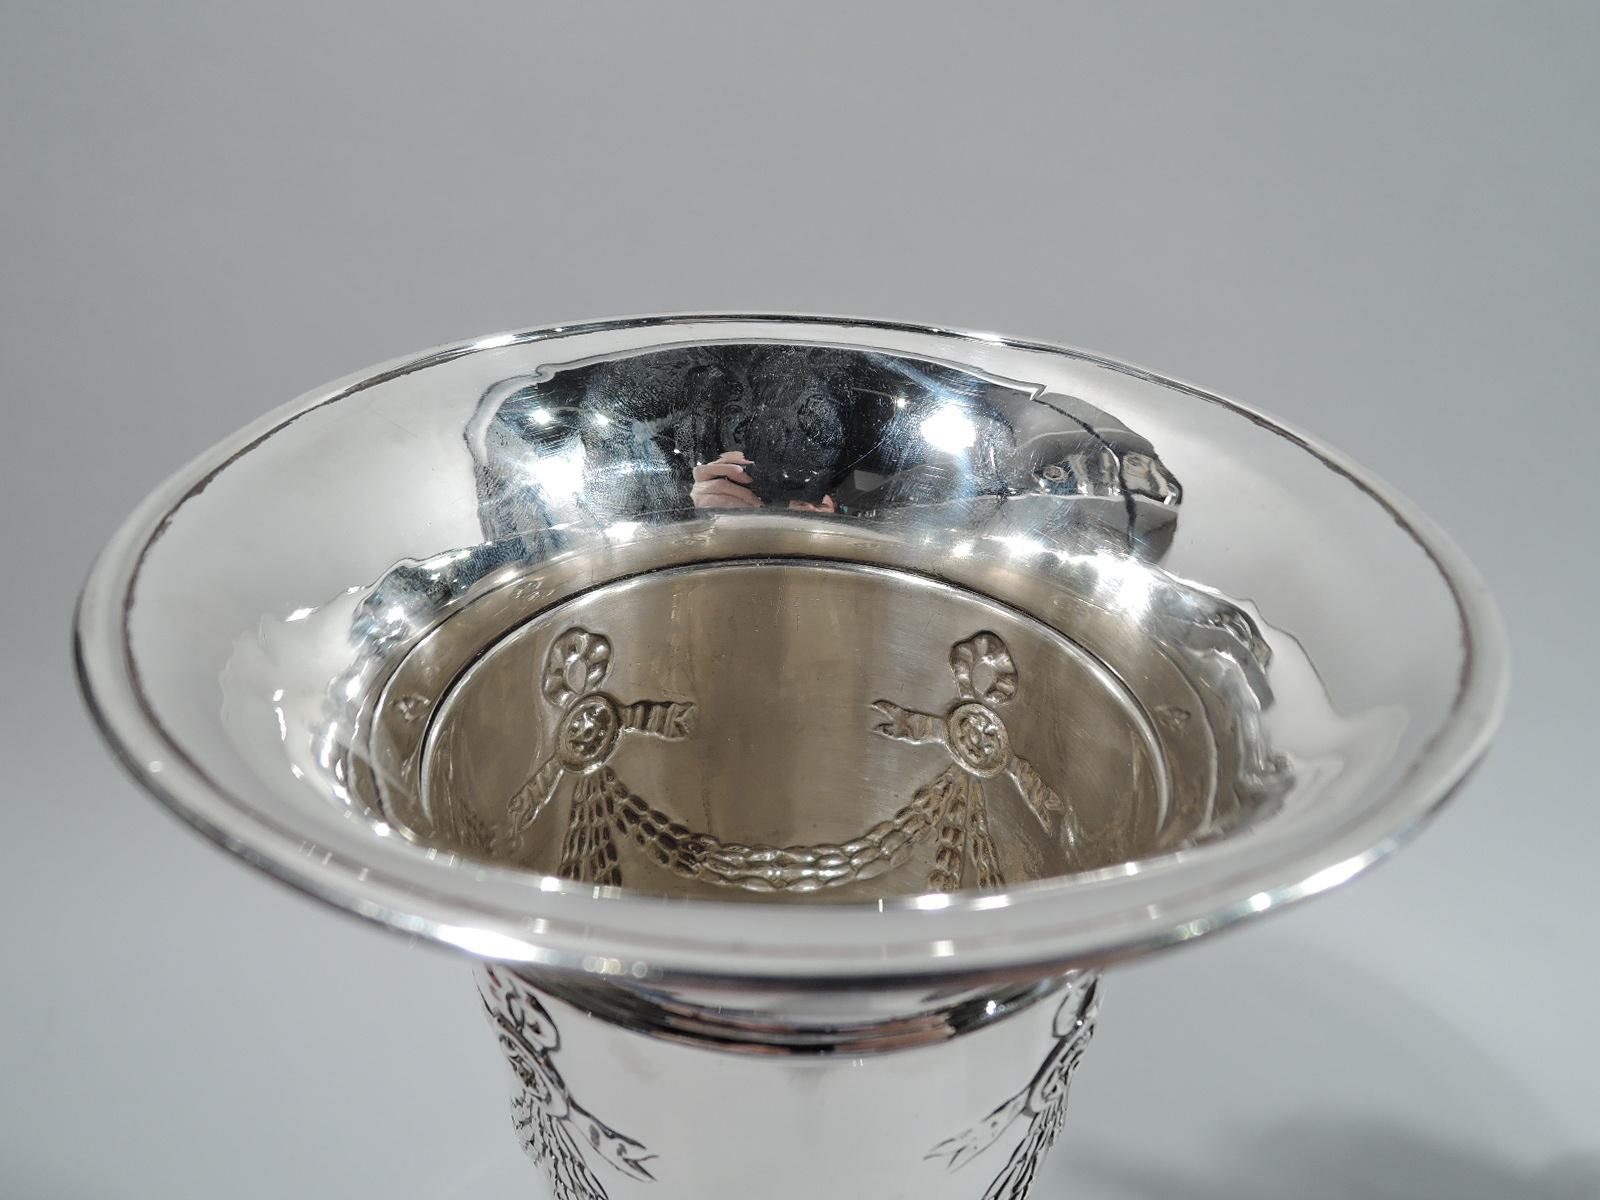 Edwardian Regency sterling silver vase. Made by Black, Starr & Frost in New York, ca 1910. Straight and tapering sides with flared rim and spread foot. Chased ornament with ribboned garland at top and acanthus and fluted border at base. Fully marked